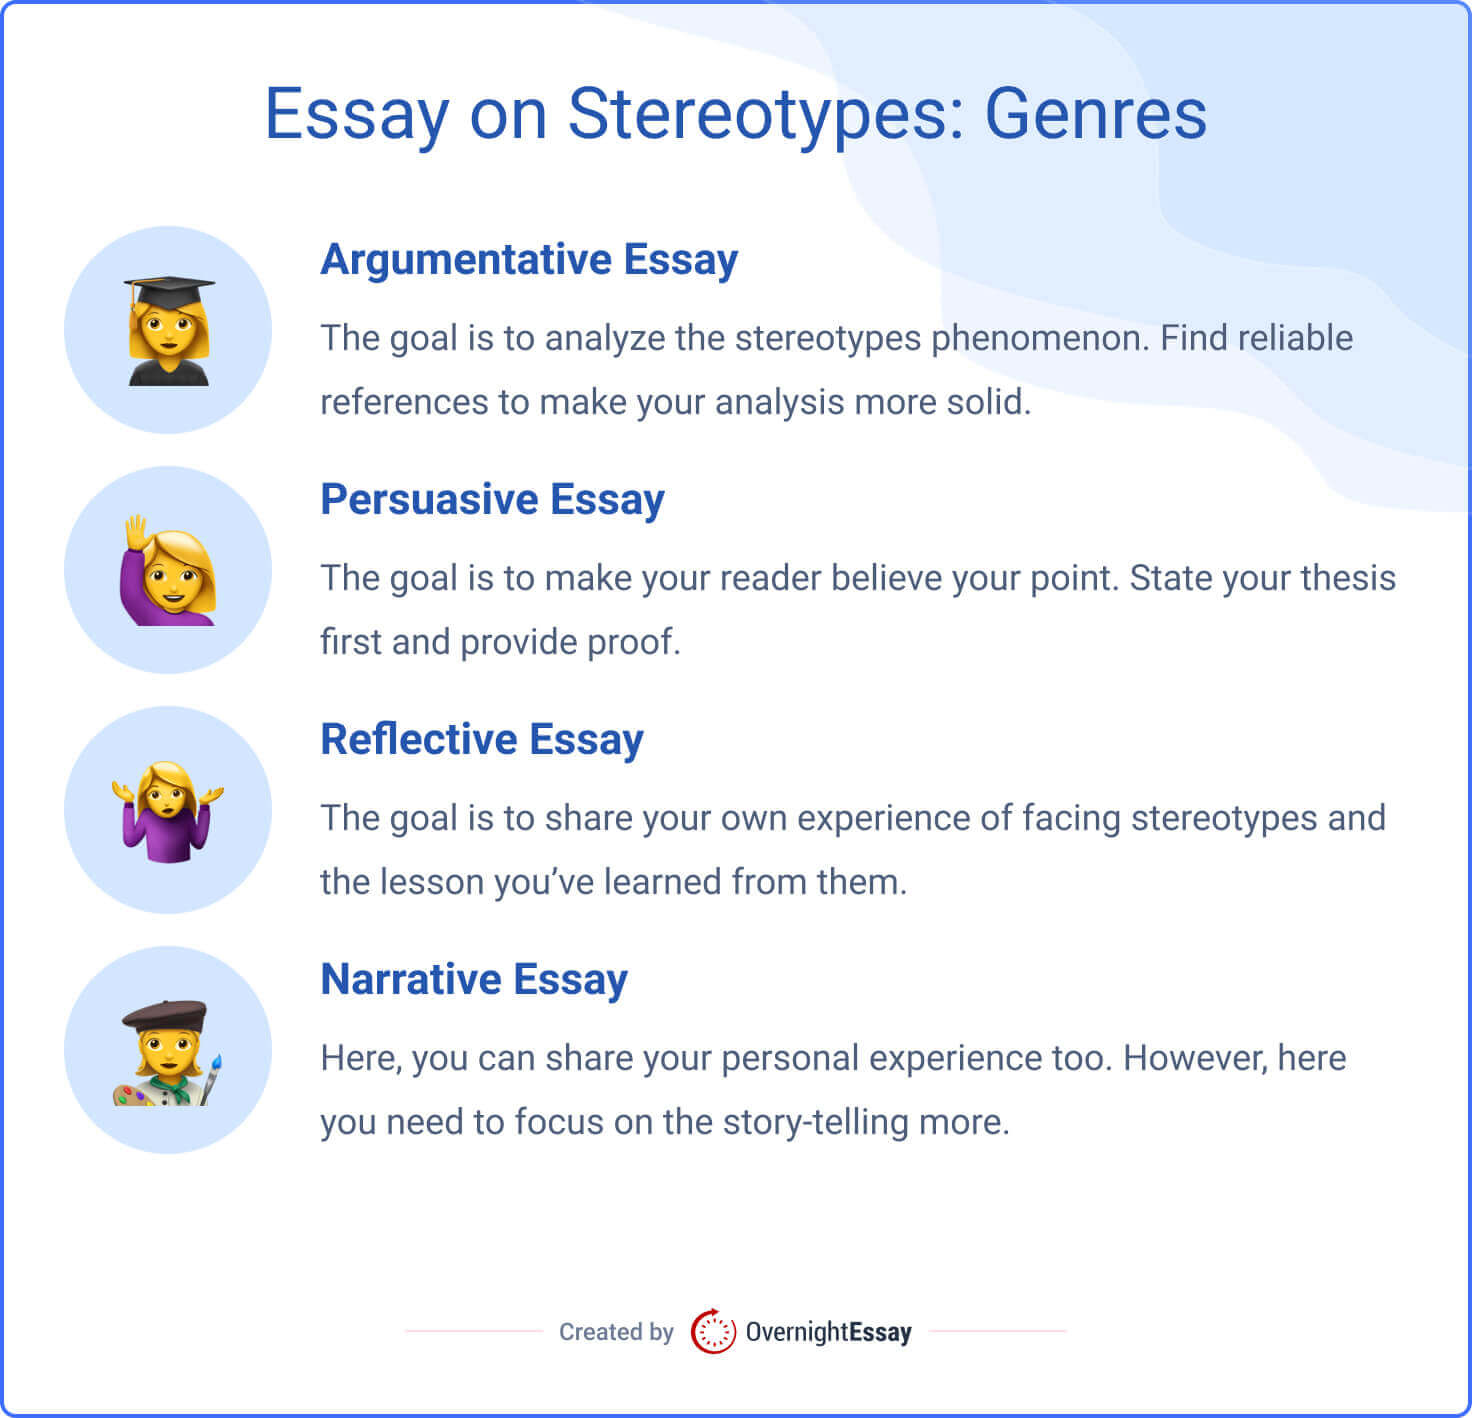 The picture contains a list of possible genres for an essay on stereotypes with shord descriptions.